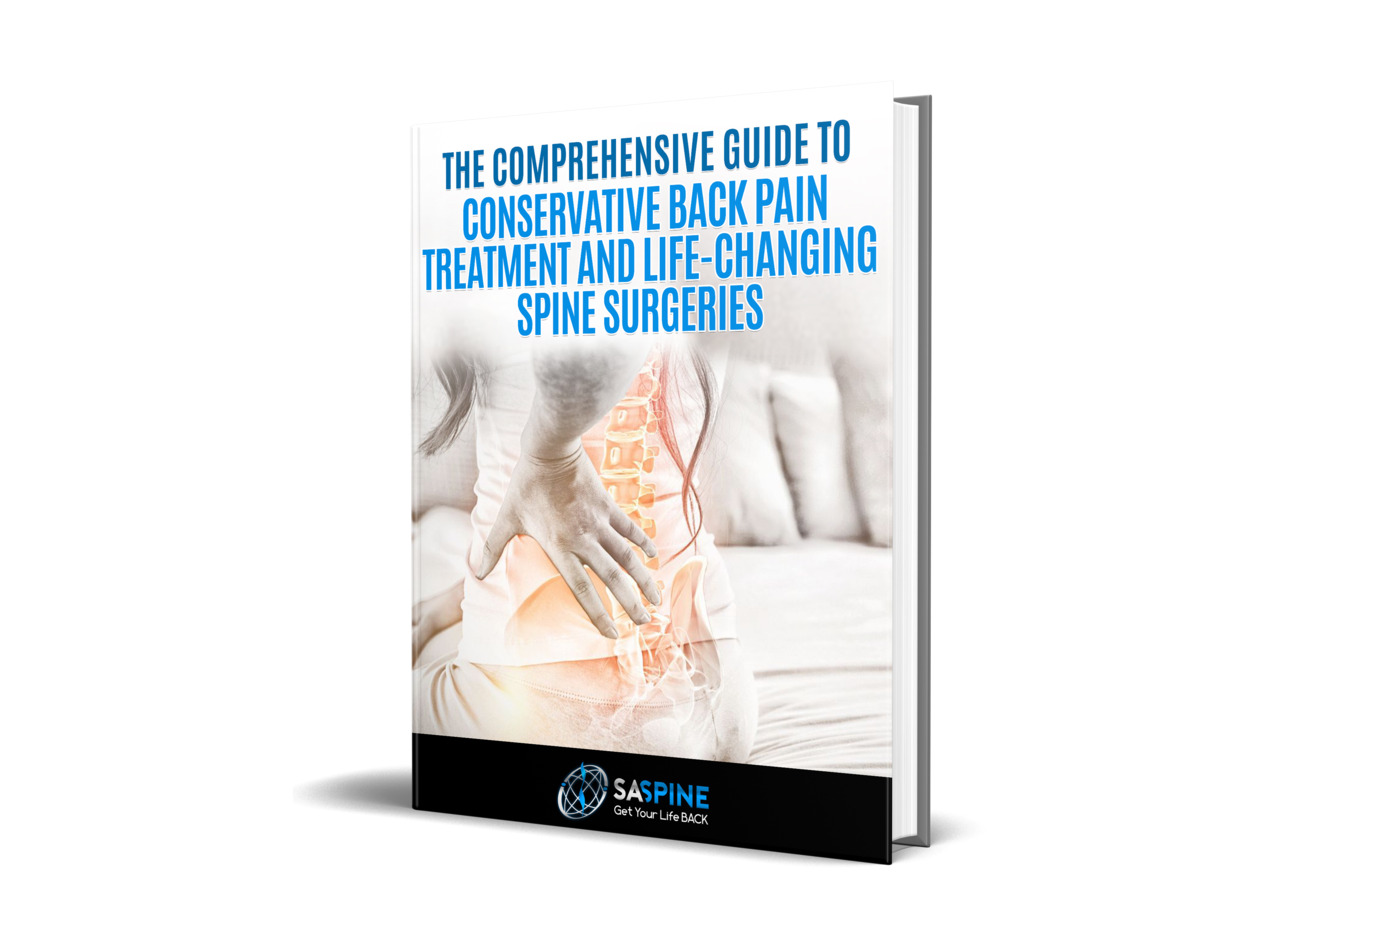 SASpine is a leading spine care clinic based in San Antonio, TX, specializing in both conservative and surgical treatments for spinal disorders.